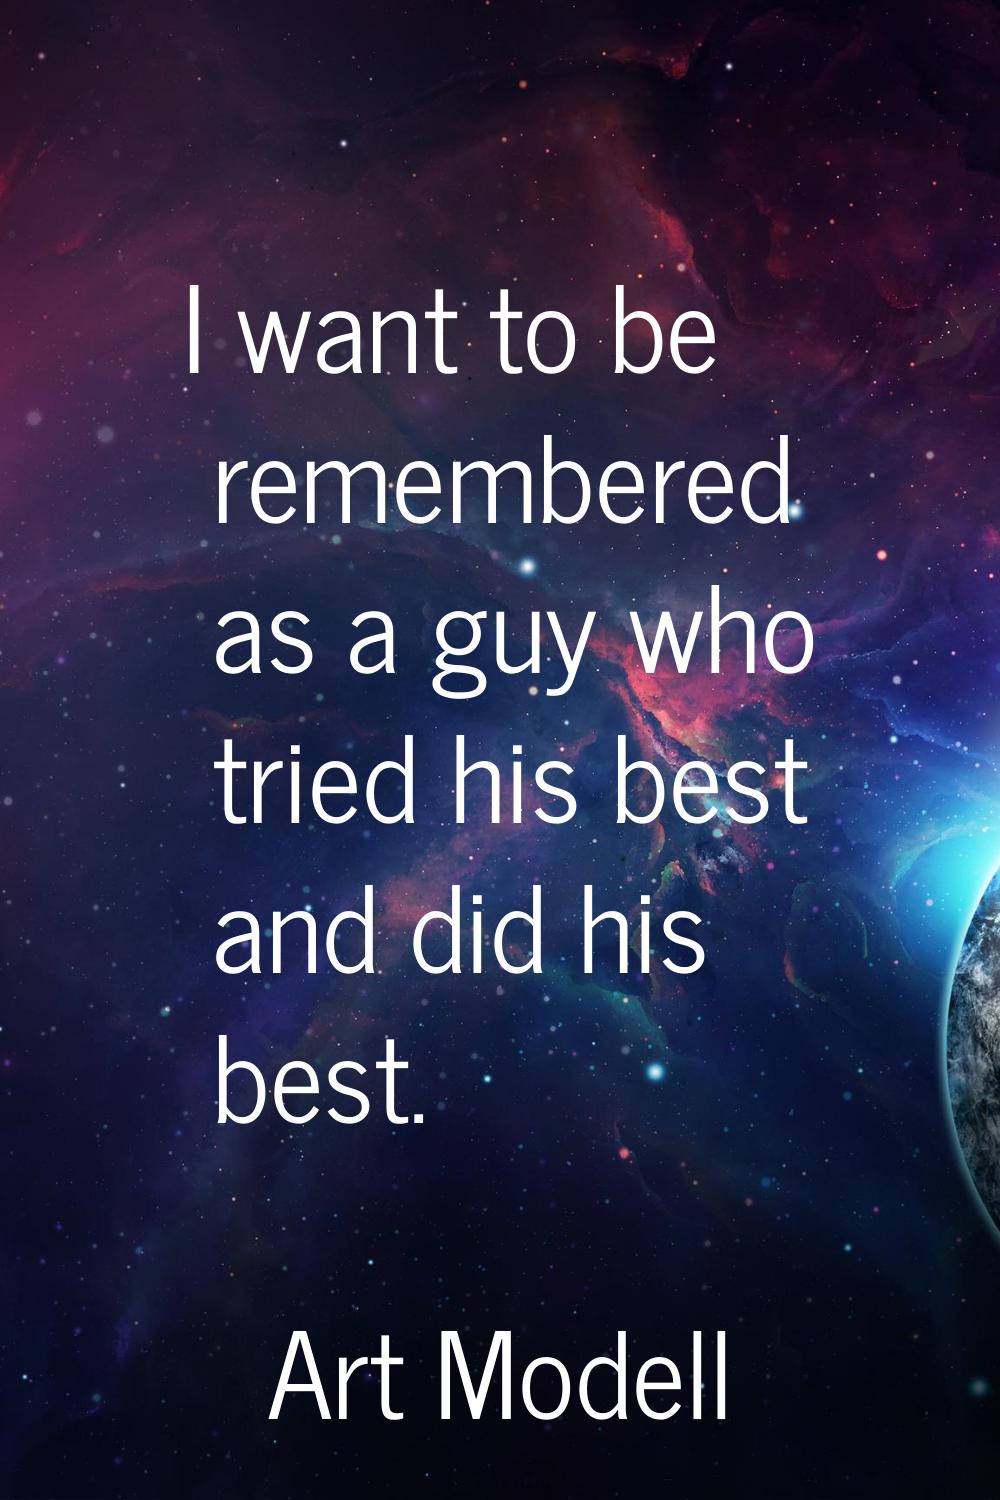 I want to be remembered as a guy who tried his best and did his best.